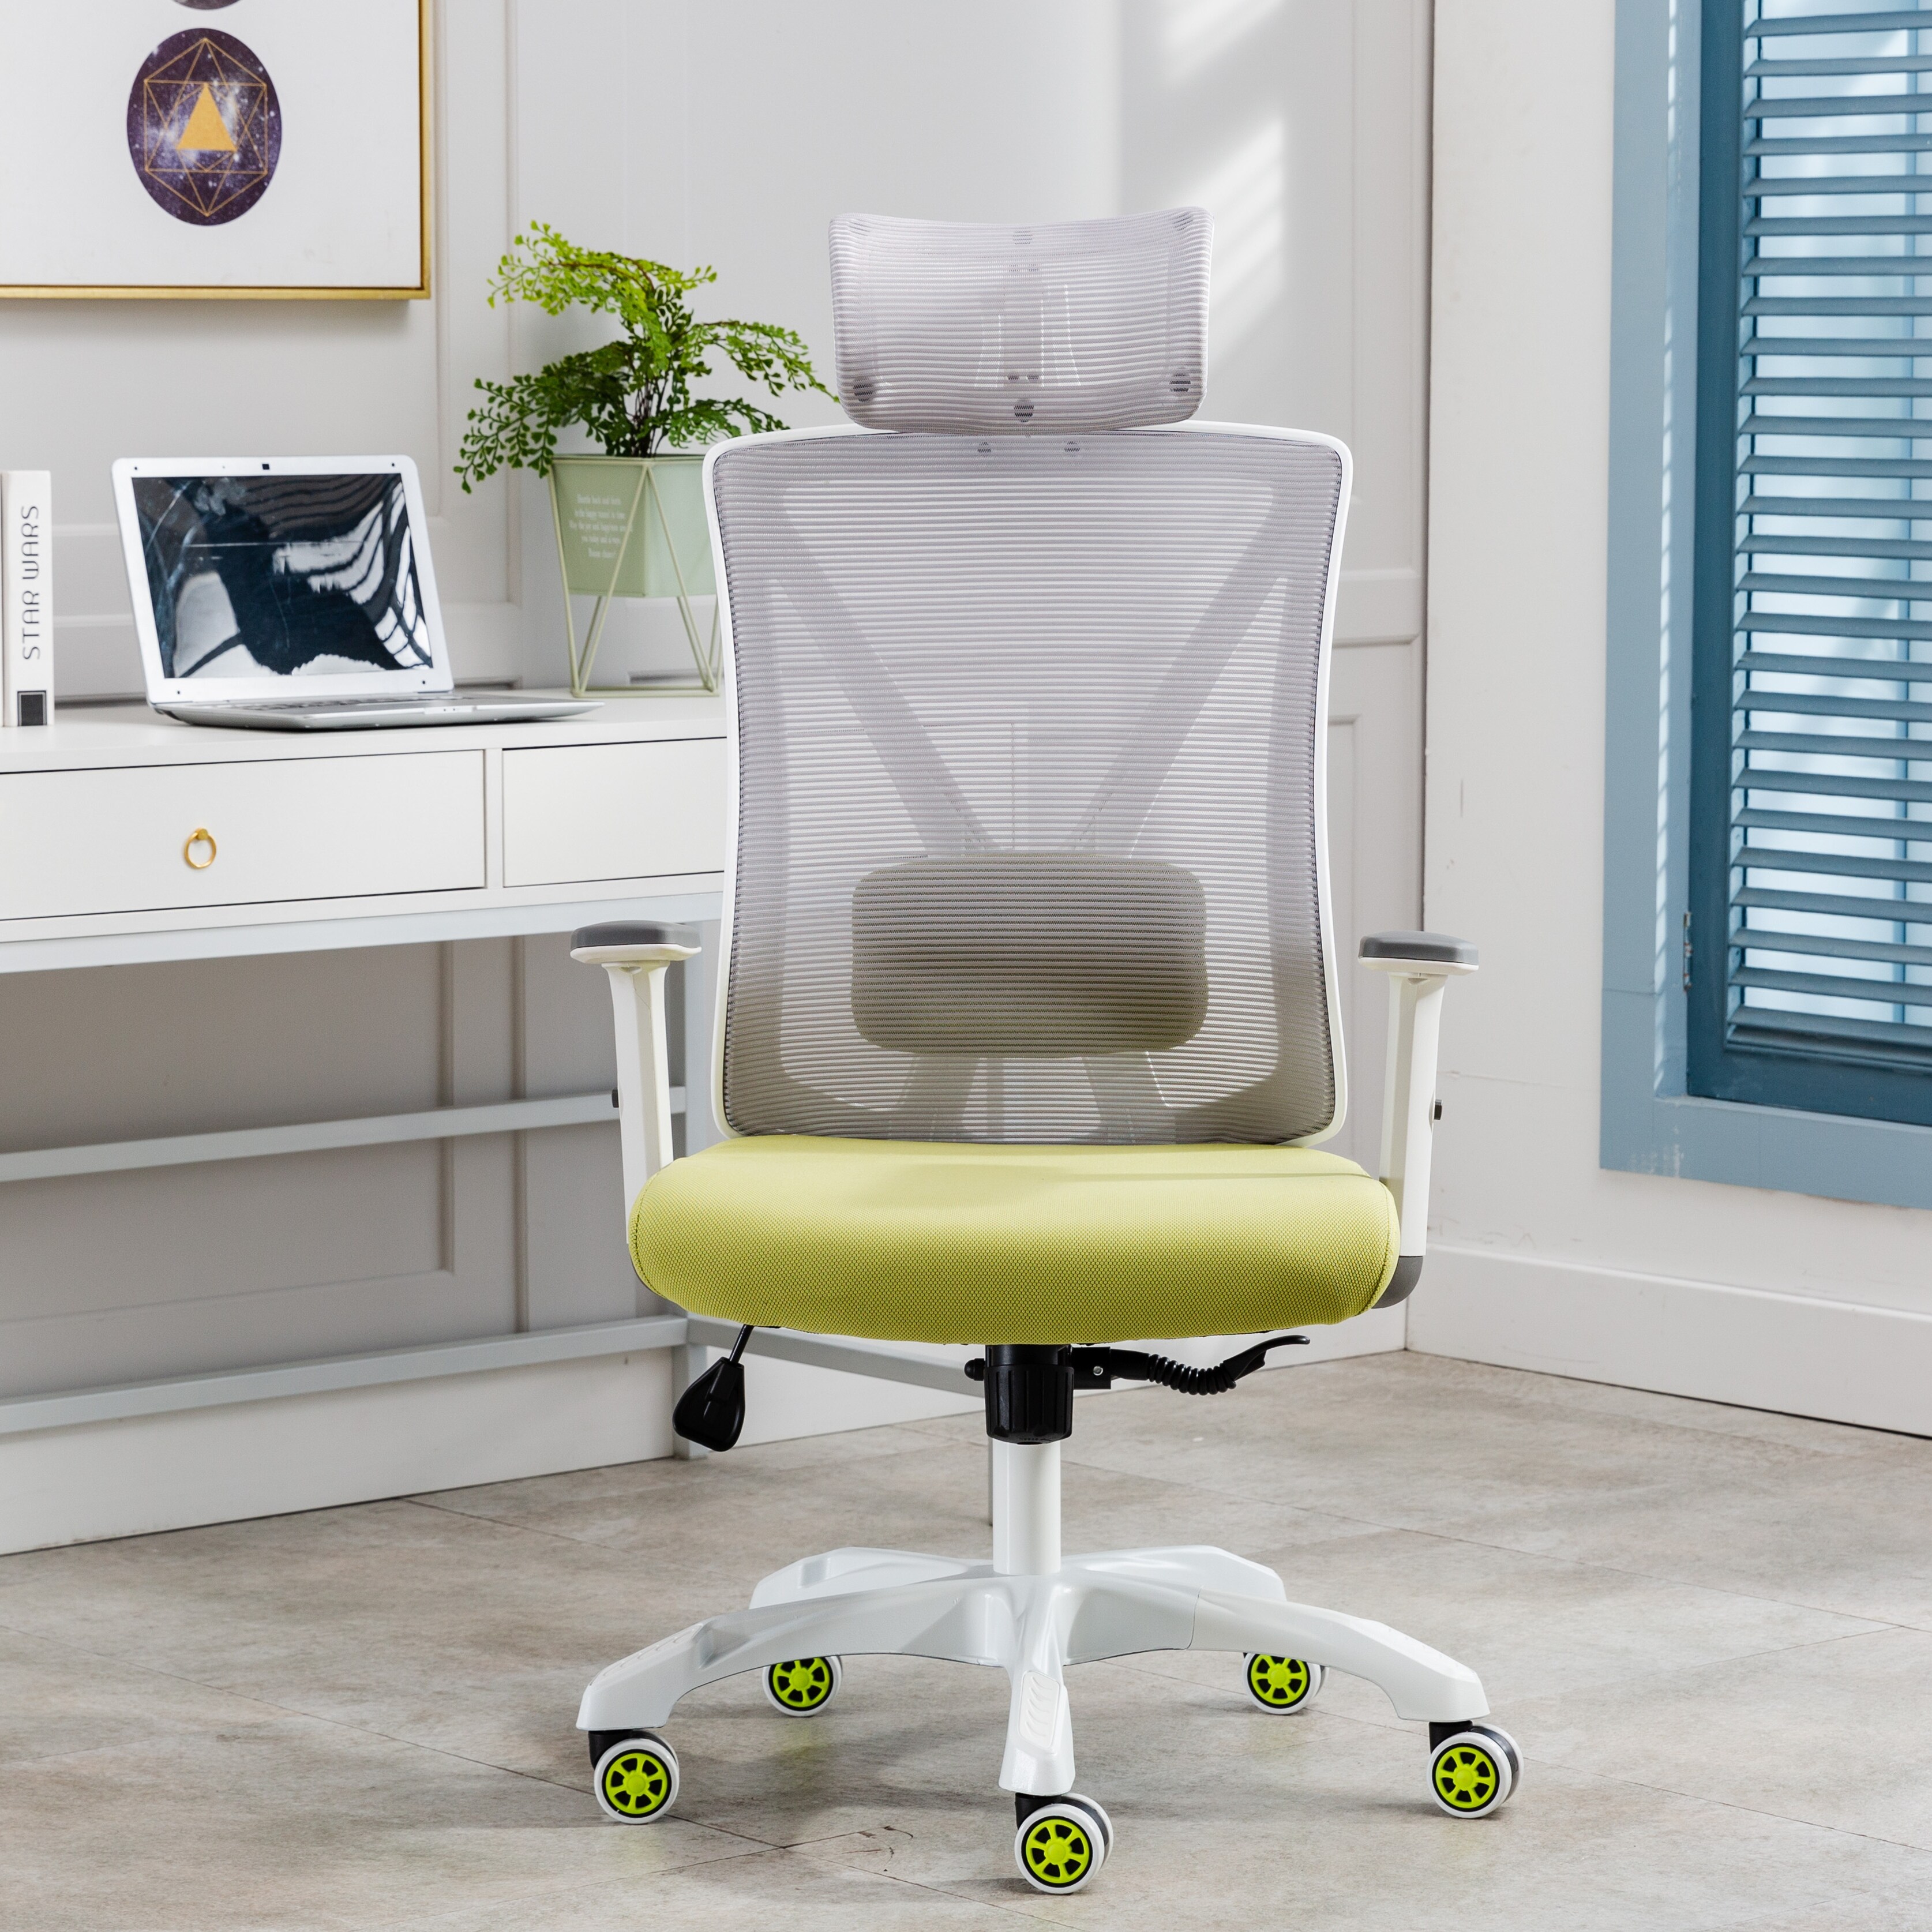 GEROJO Ergonomic Home Office Chair,Adjustable Lumbar SupportandArmrests,Breathable Mesh Back and Padded Seat,Green and Gray